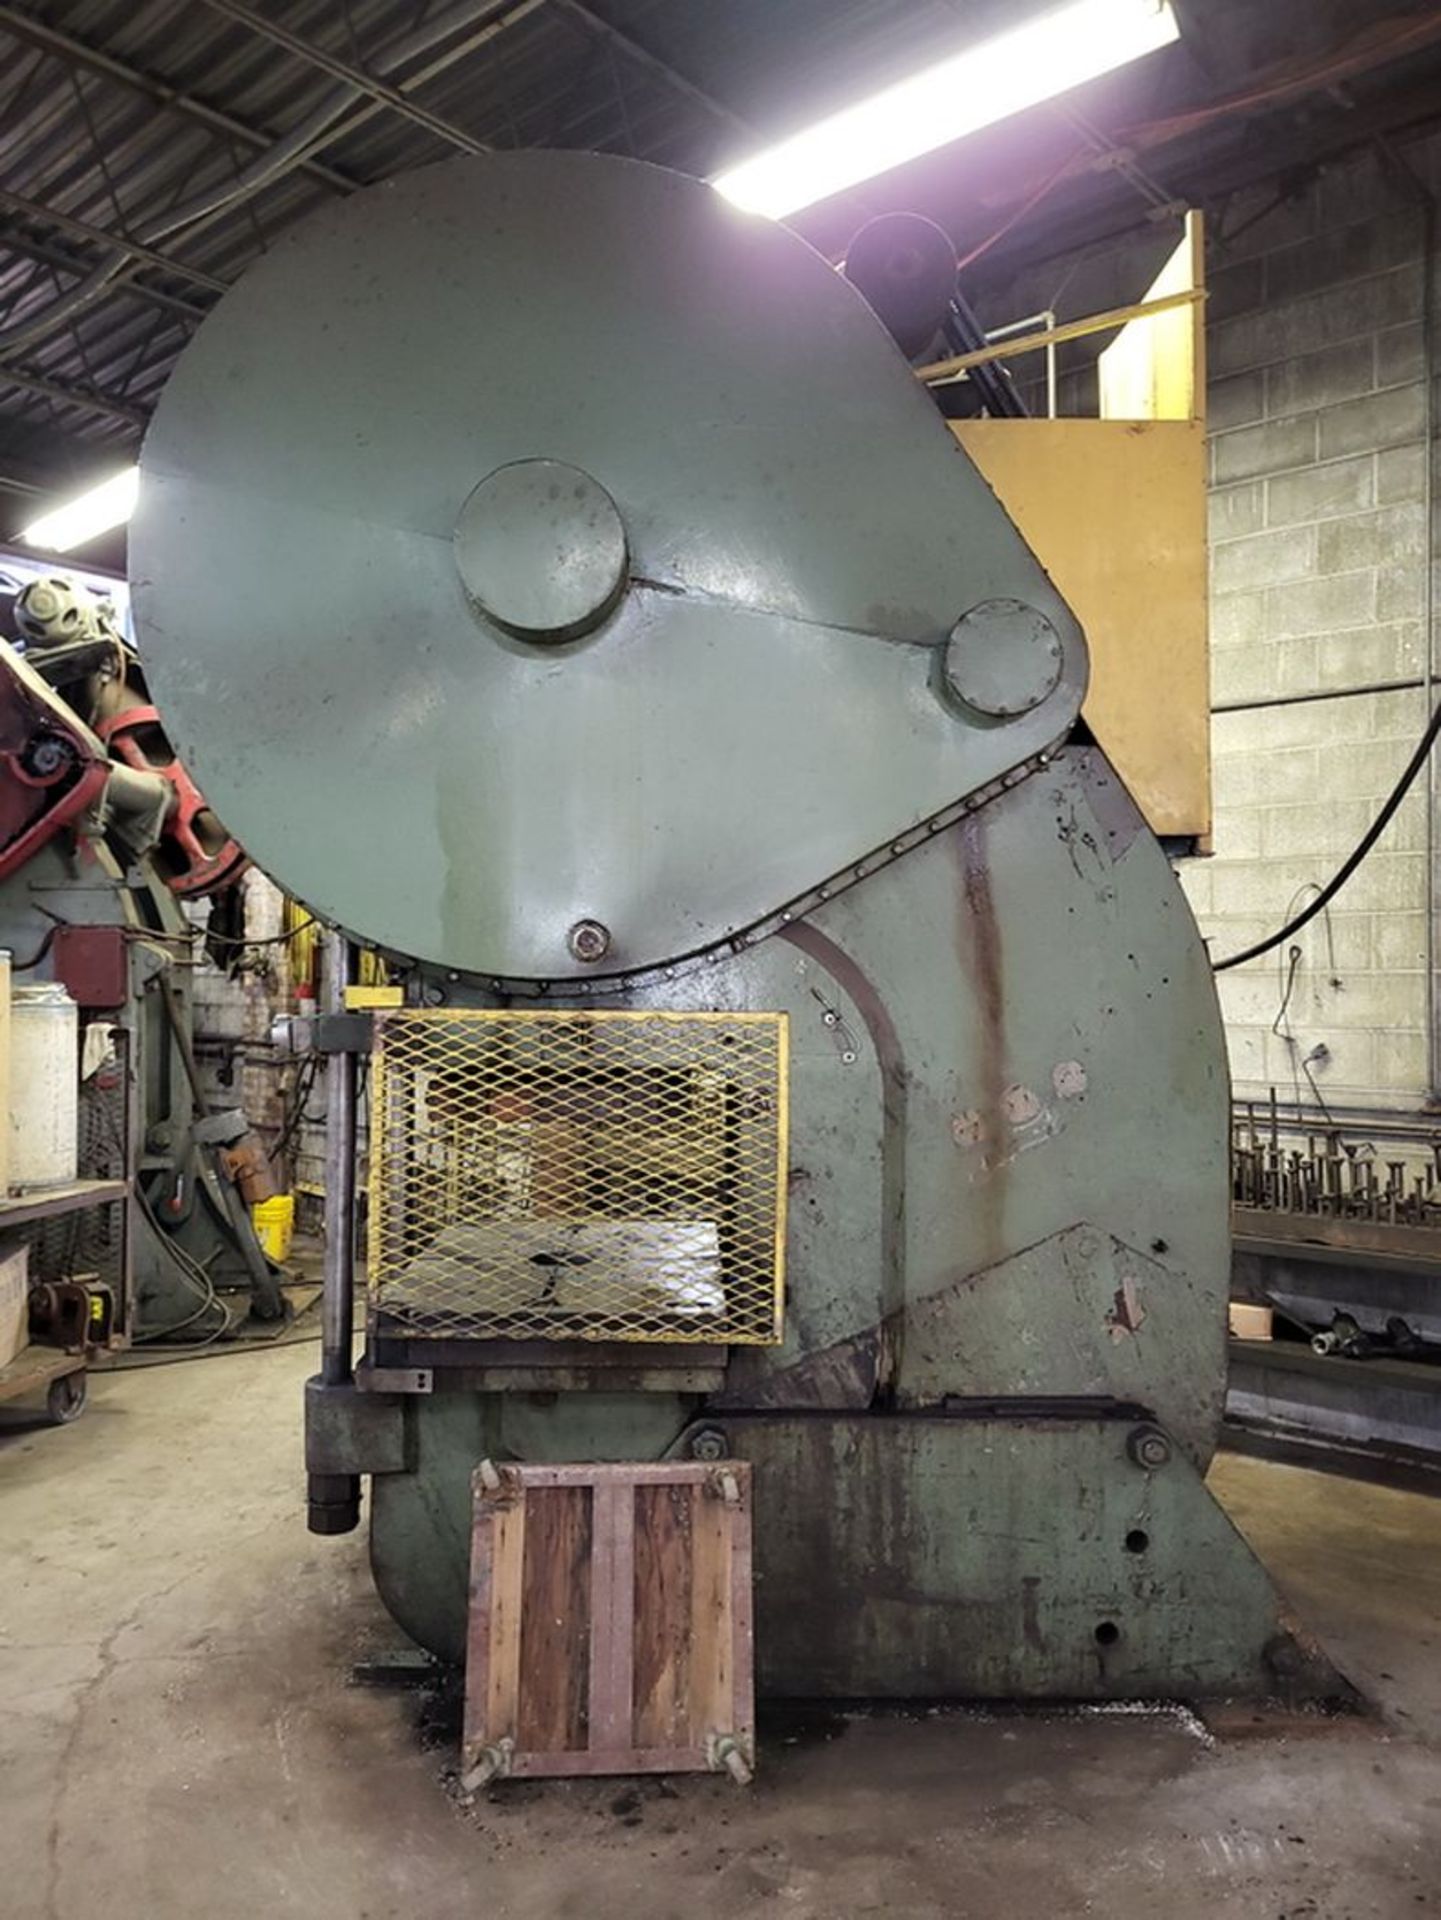 Warco 150-Ton Cap. Model 150 O.B.I. Punch Press, SN: 84119, Guarded, Air Clutch, Auto Adjust Motor - Image 3 of 5